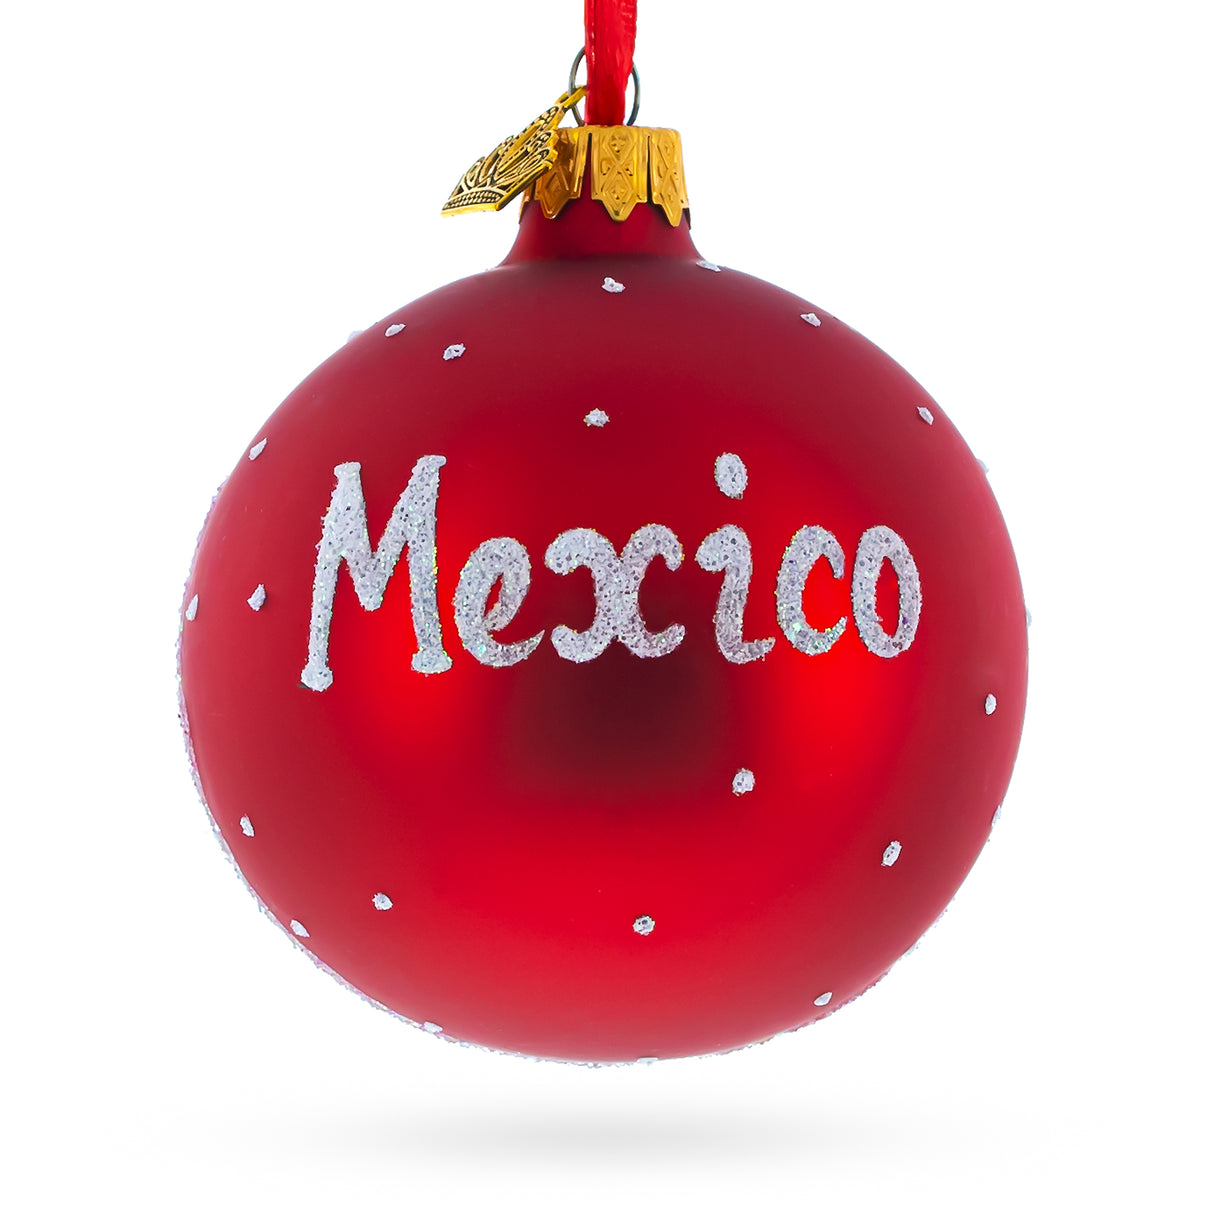 Buy Christmas Ornaments Travel North America Mexico Wonders of the World by BestPysanky Online Gift Ship